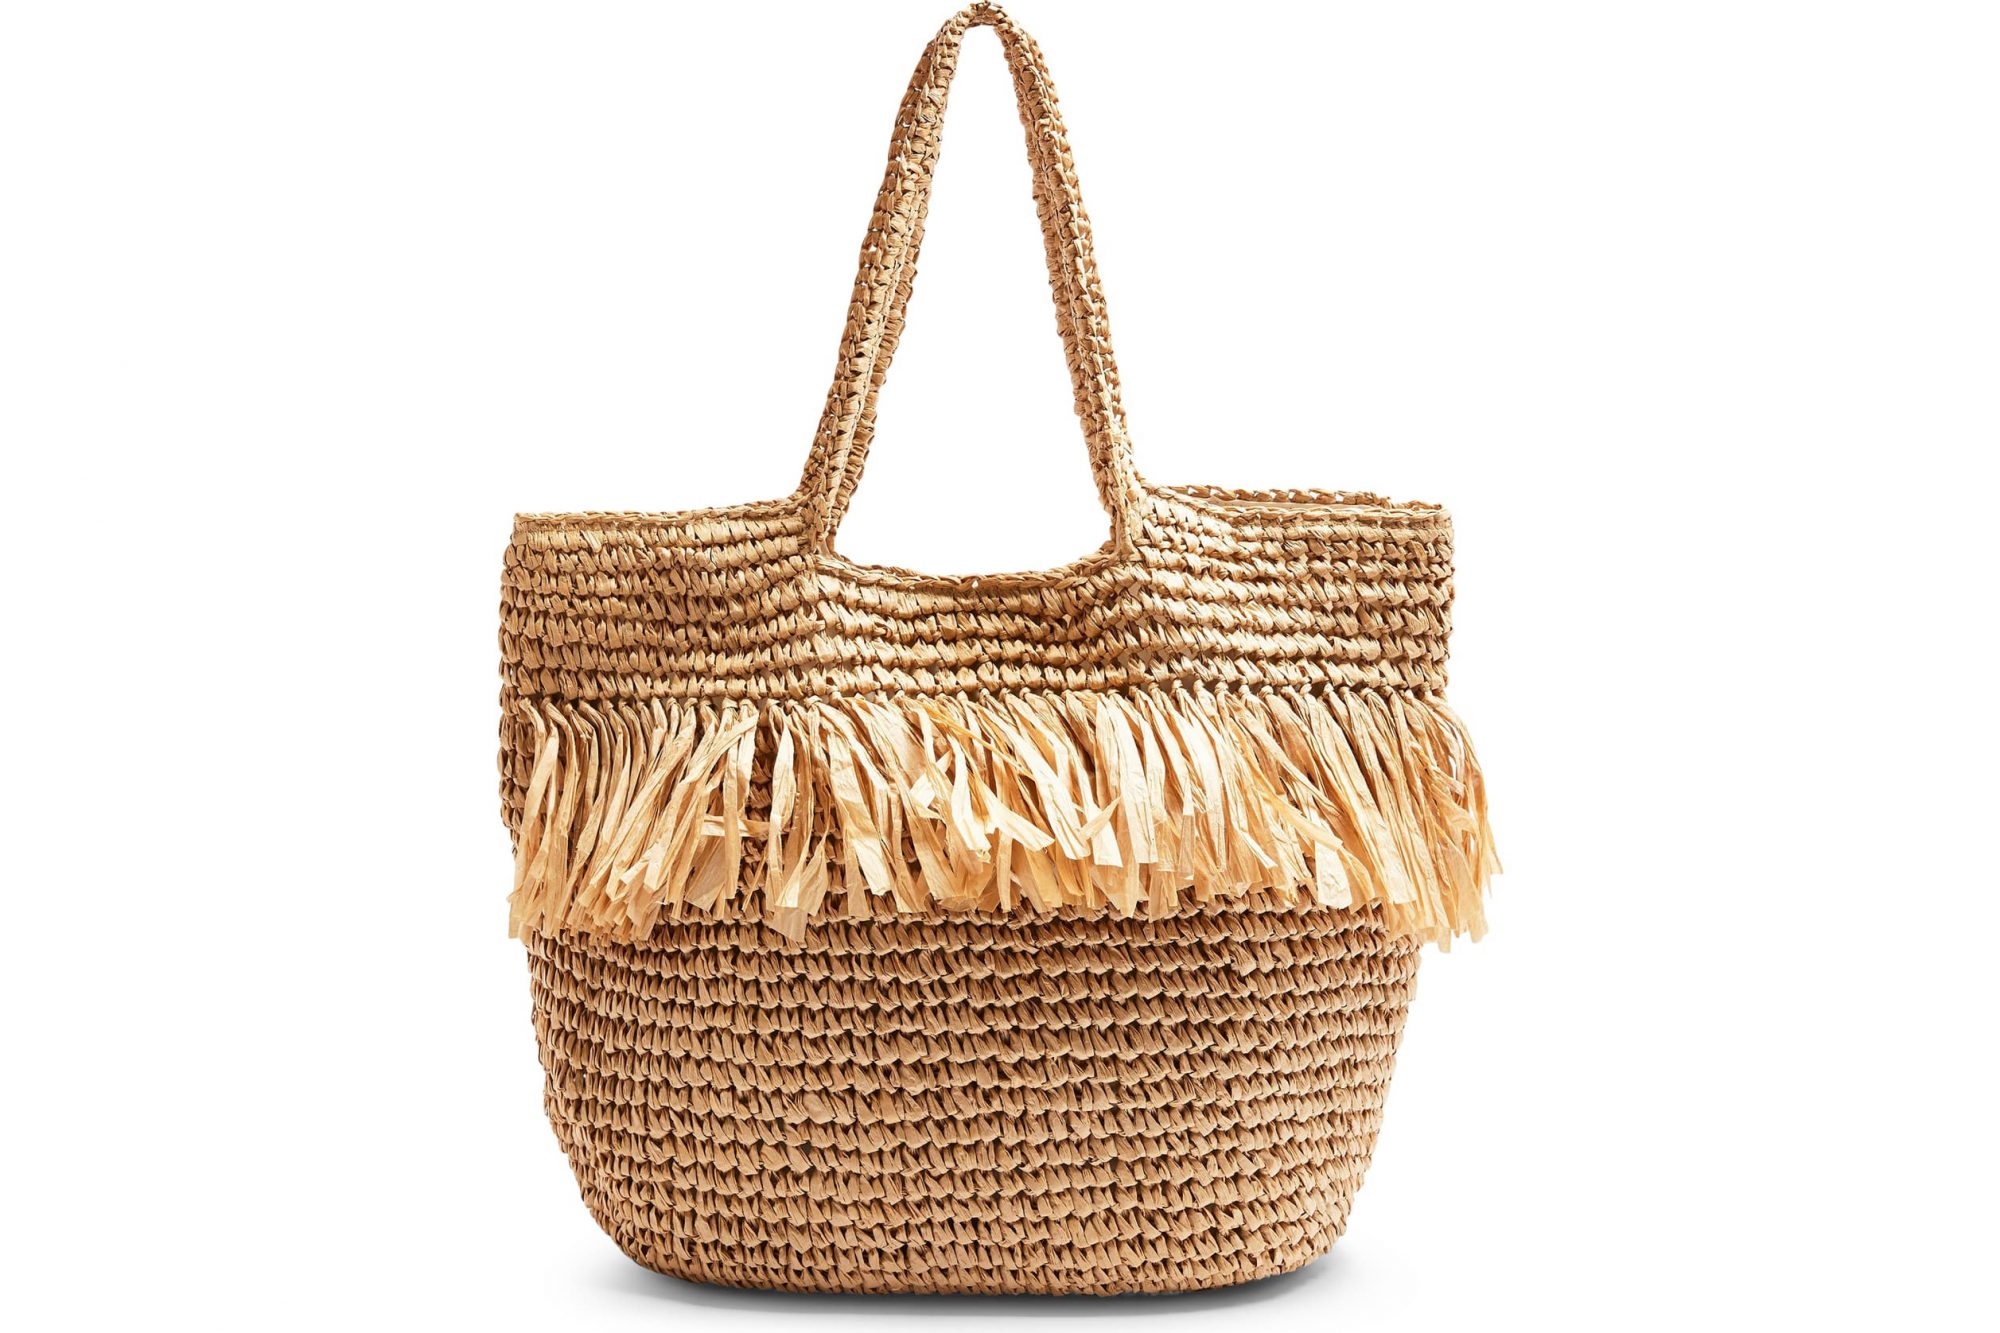 Buy ALINUOYQ Straw Bag Summer Beach Tote Bag for Women,Large Straw Tote Bag  with Tassels Straw Handbags Woven Shoulder Bag, Khaki at Amazon.in